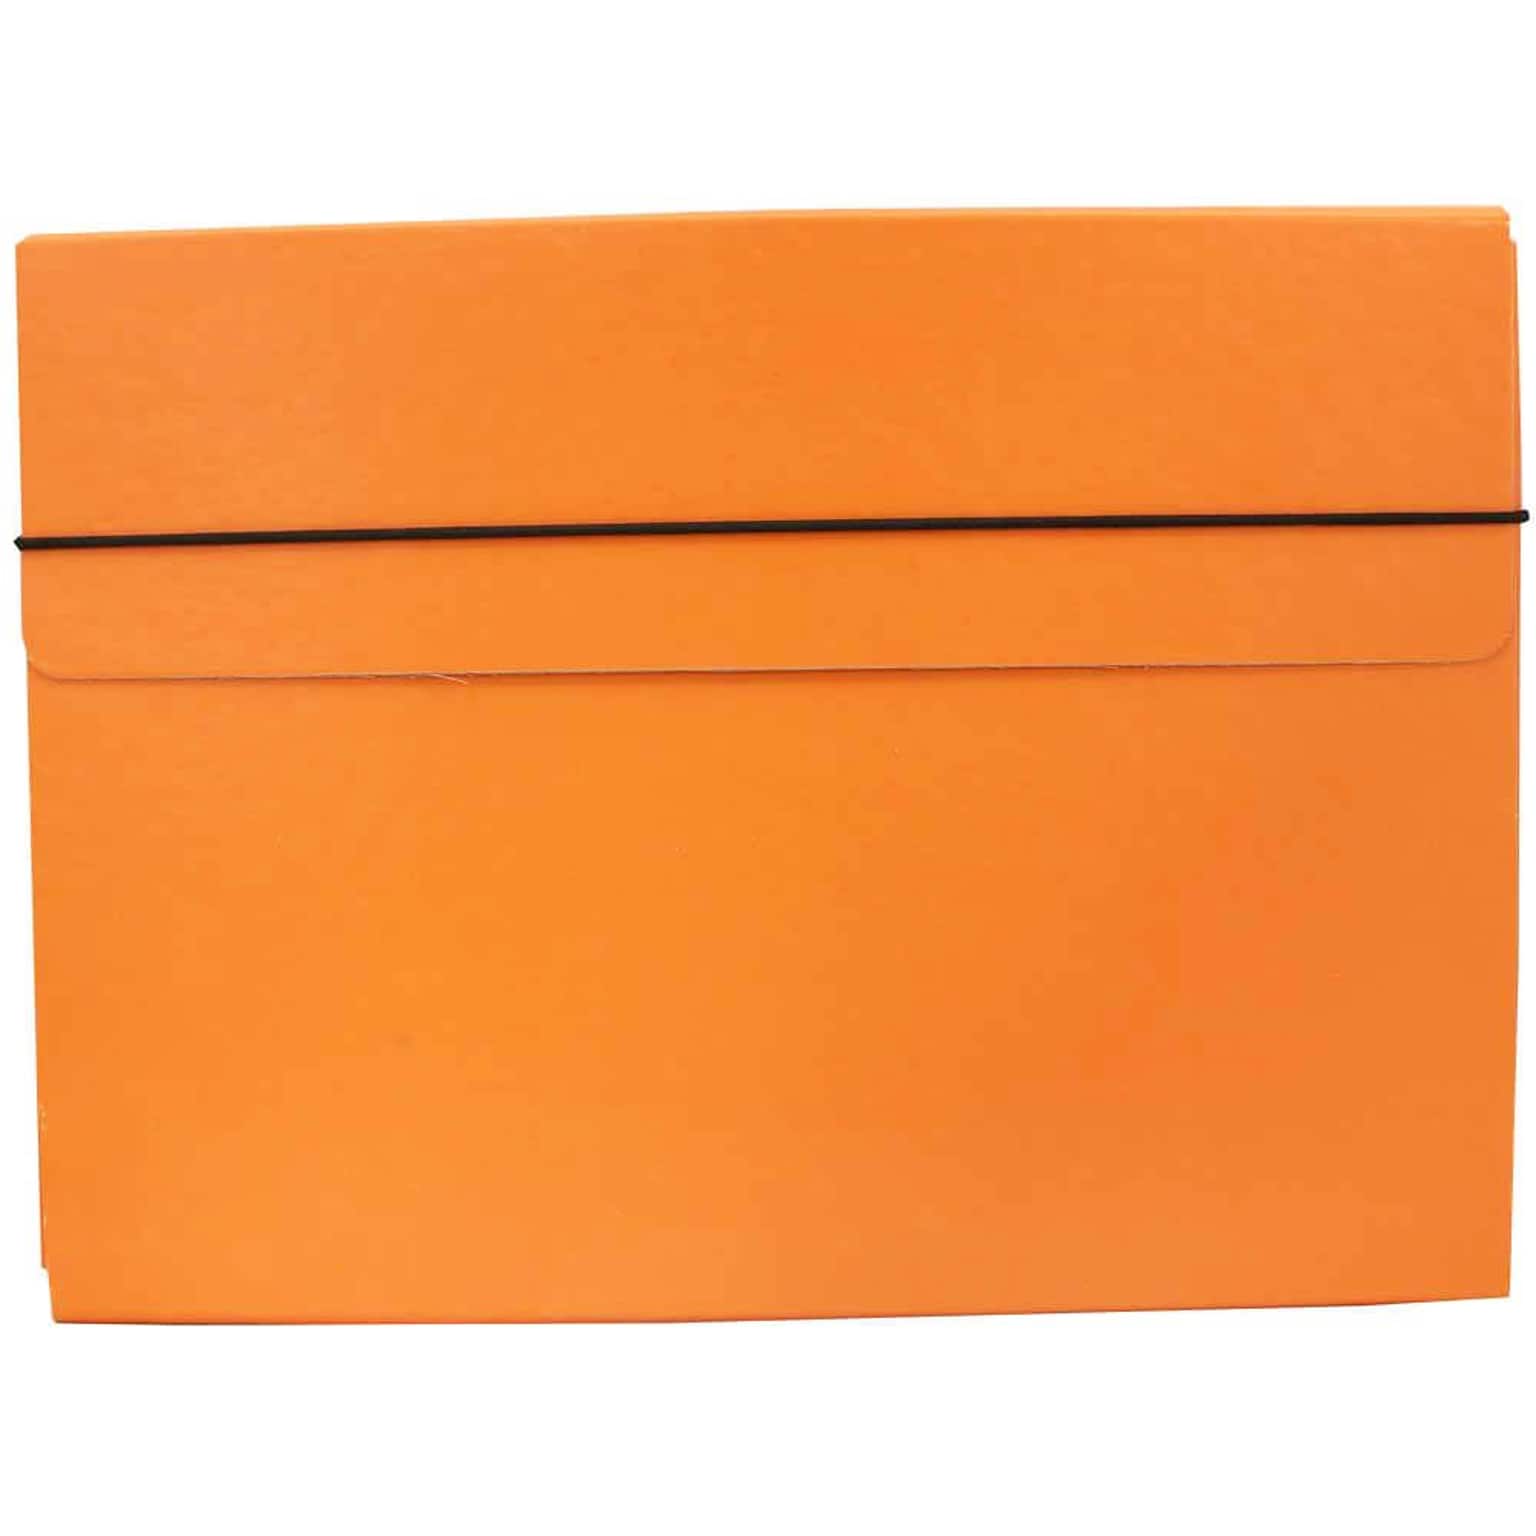 JAM Paper® Strong Thin Portfolio Carrying Case with Elastic Band Closure - 9 1/4 x 1/2 x 12 1/2 - Orange - Sold Individually